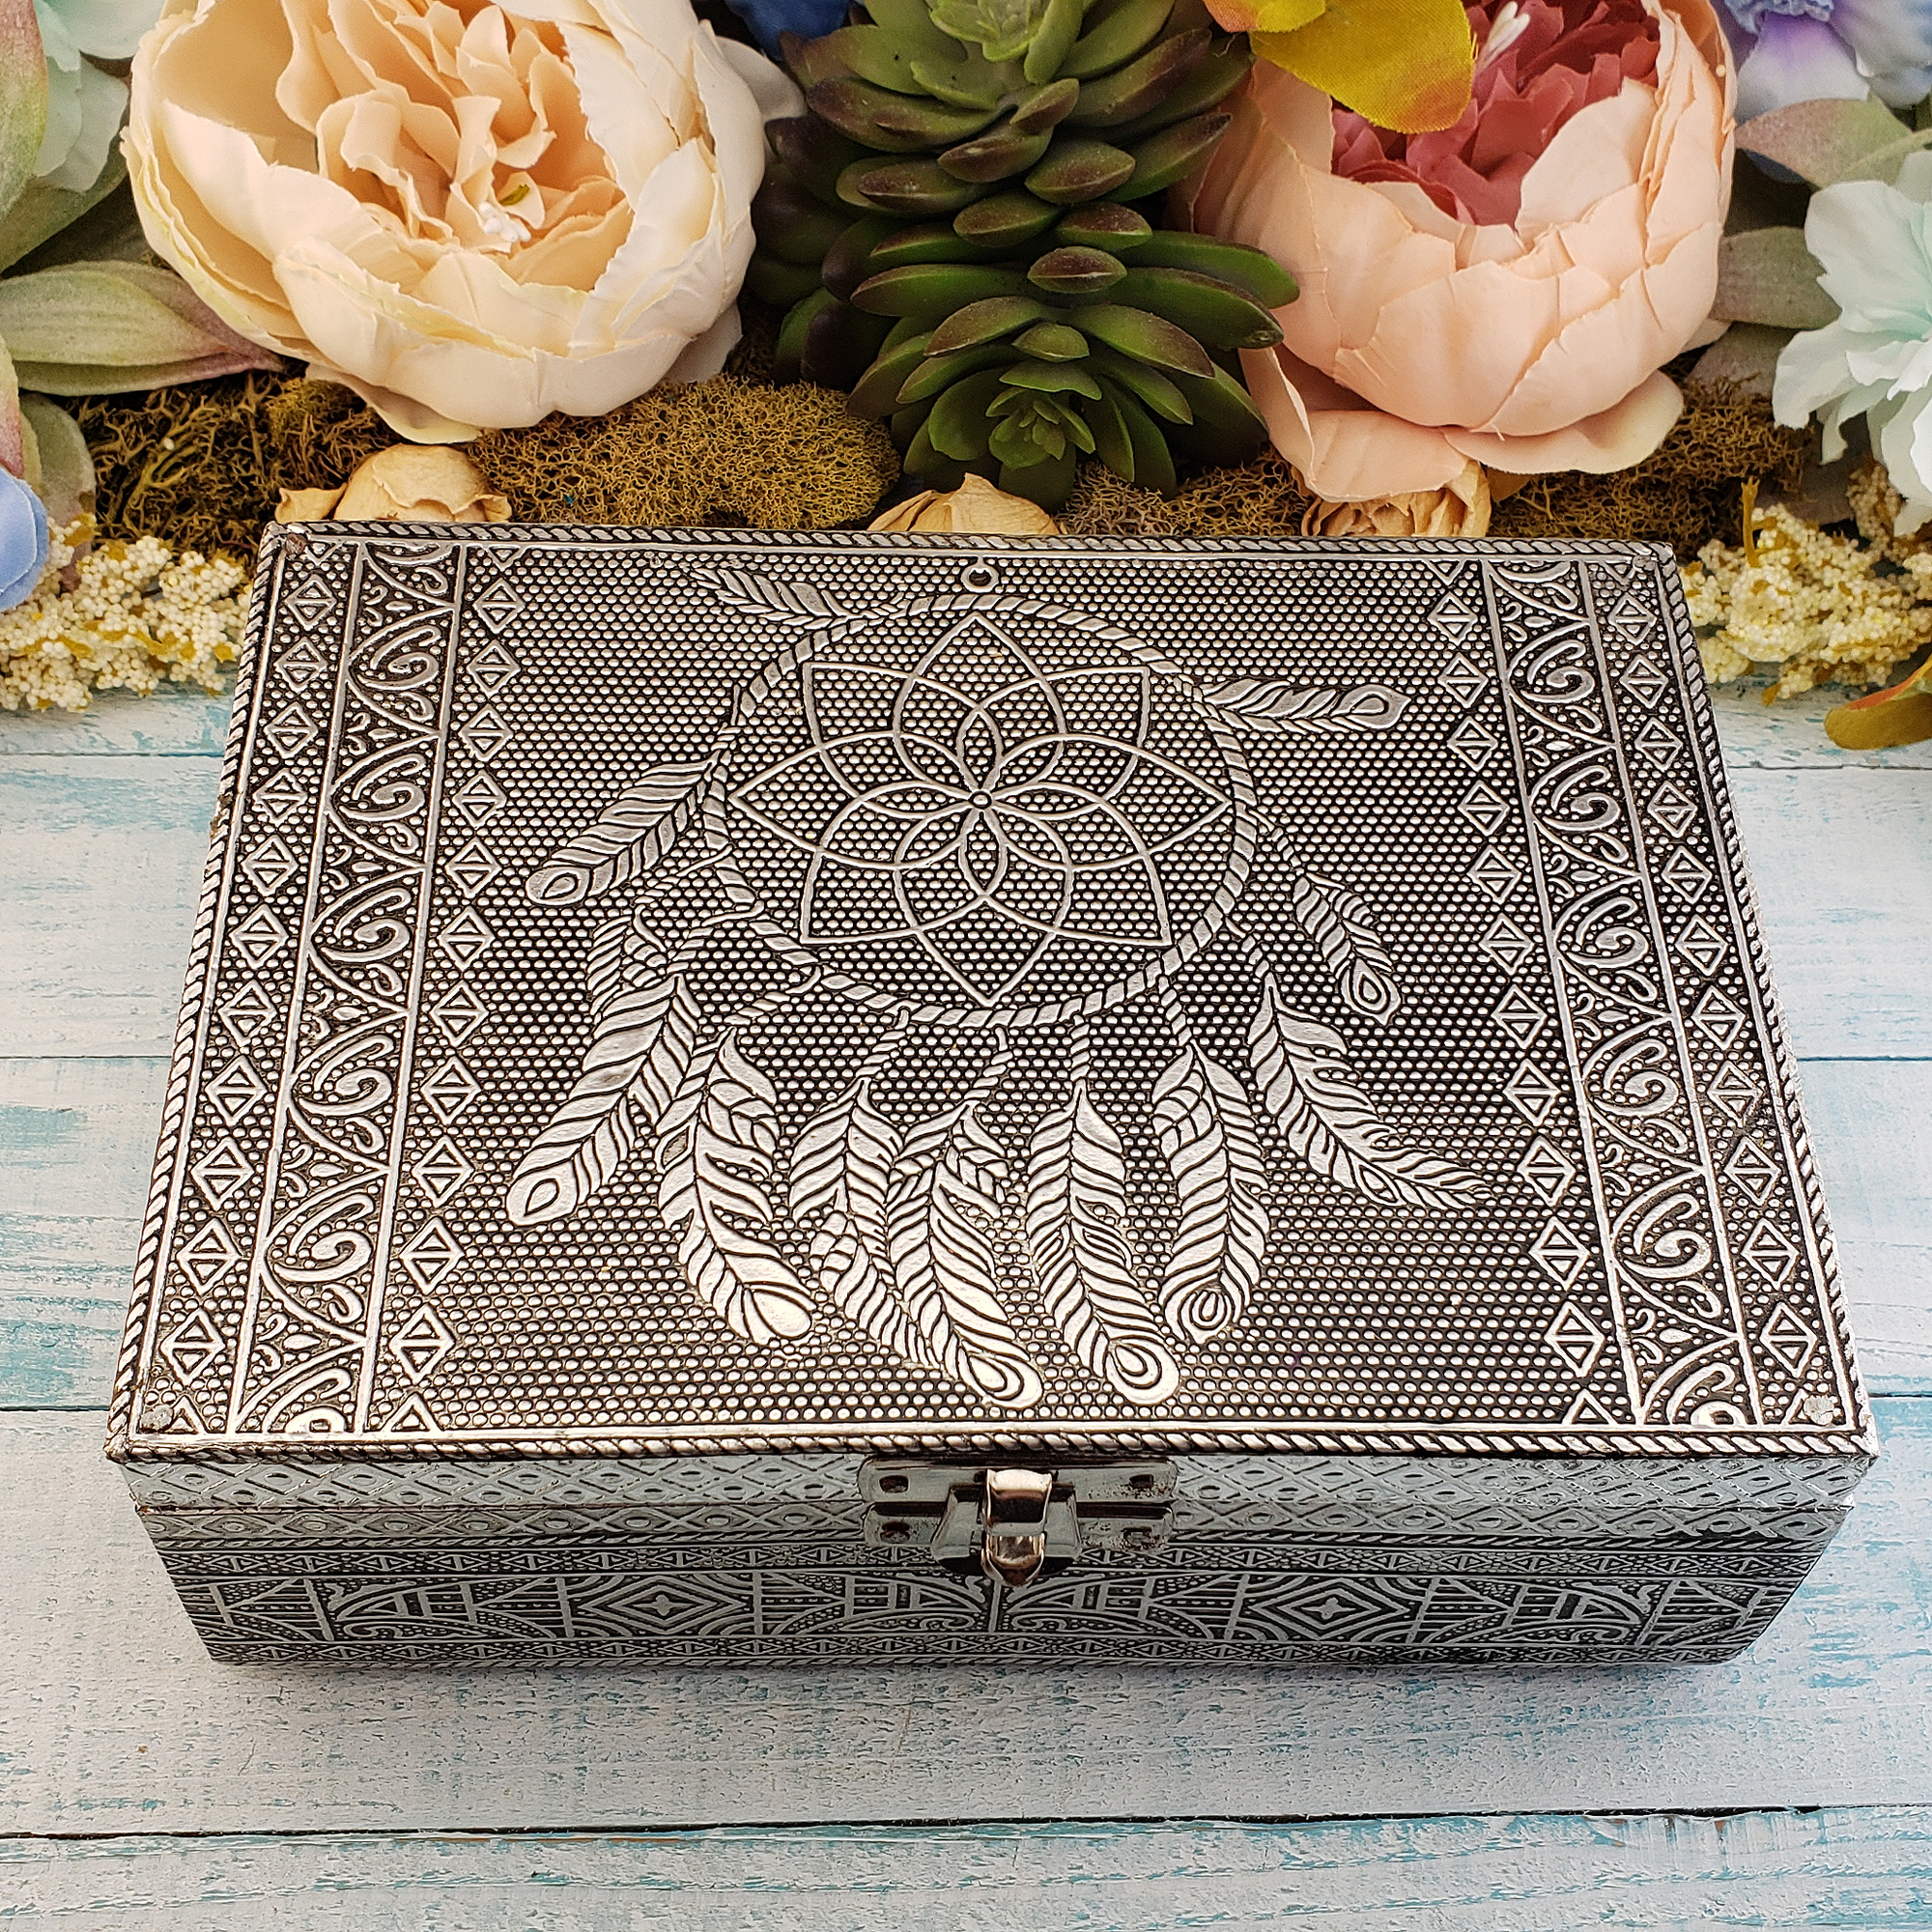 Dreamcatcher Embossed Metal Over Wooden Decorative Storage Box - 6.75 x 4.75 inches